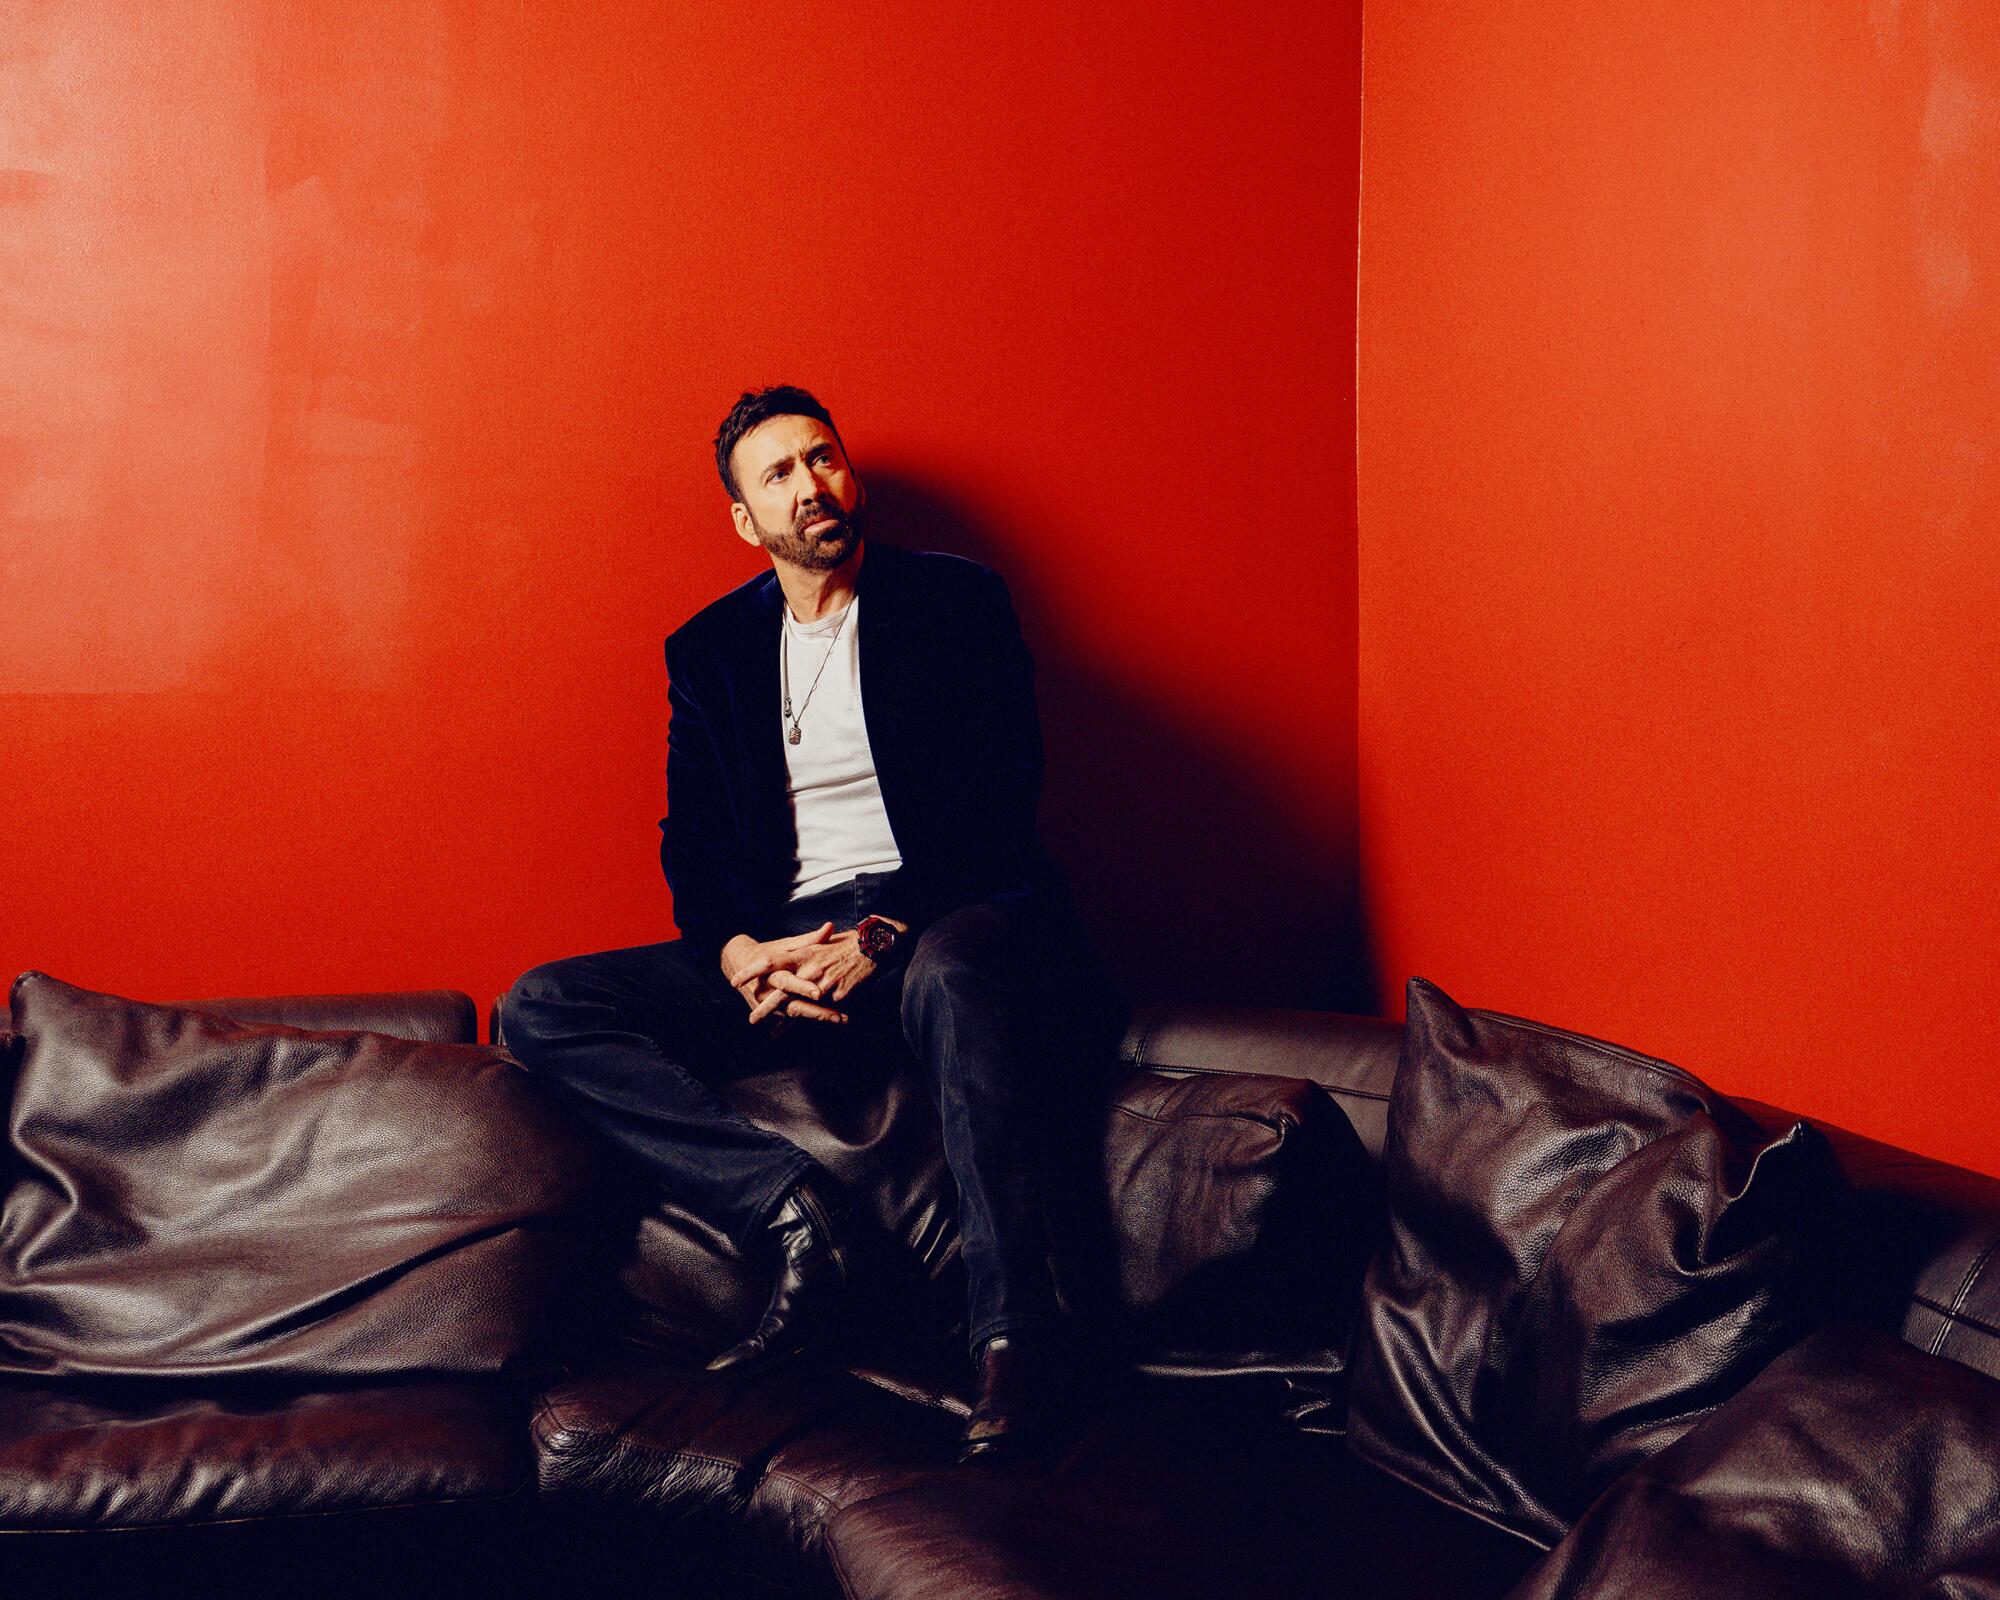 Nicolas Cage sits on the back of couch for a portrait, leaning against red walls.